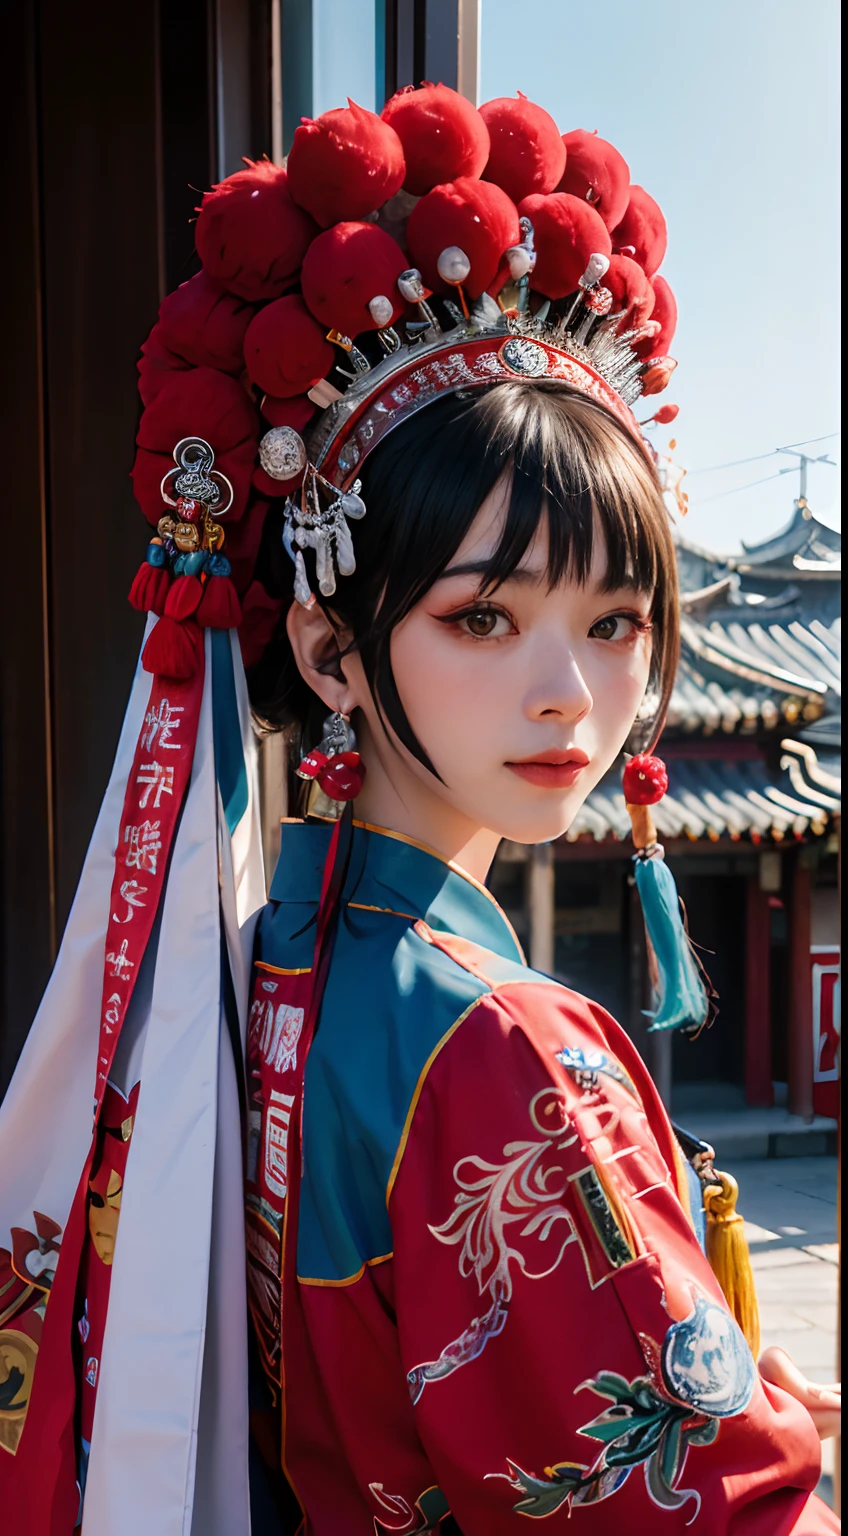 8K，RAW photos，best qualtiy，tmasterpiece，realisticlying，photograph realistic，ultra - detailed，Peking Opera face，
1 rapariga， CNOperaCrown， From the front， looking at viewert， putting makeup on， head gear， Chinese totems are painted on the face，（（（CNOperaFlag）））， The flag is from behind， sportrait， looking at viewert， ssmile， simple backgound， Keep one's mouth shut， nipple tassels，